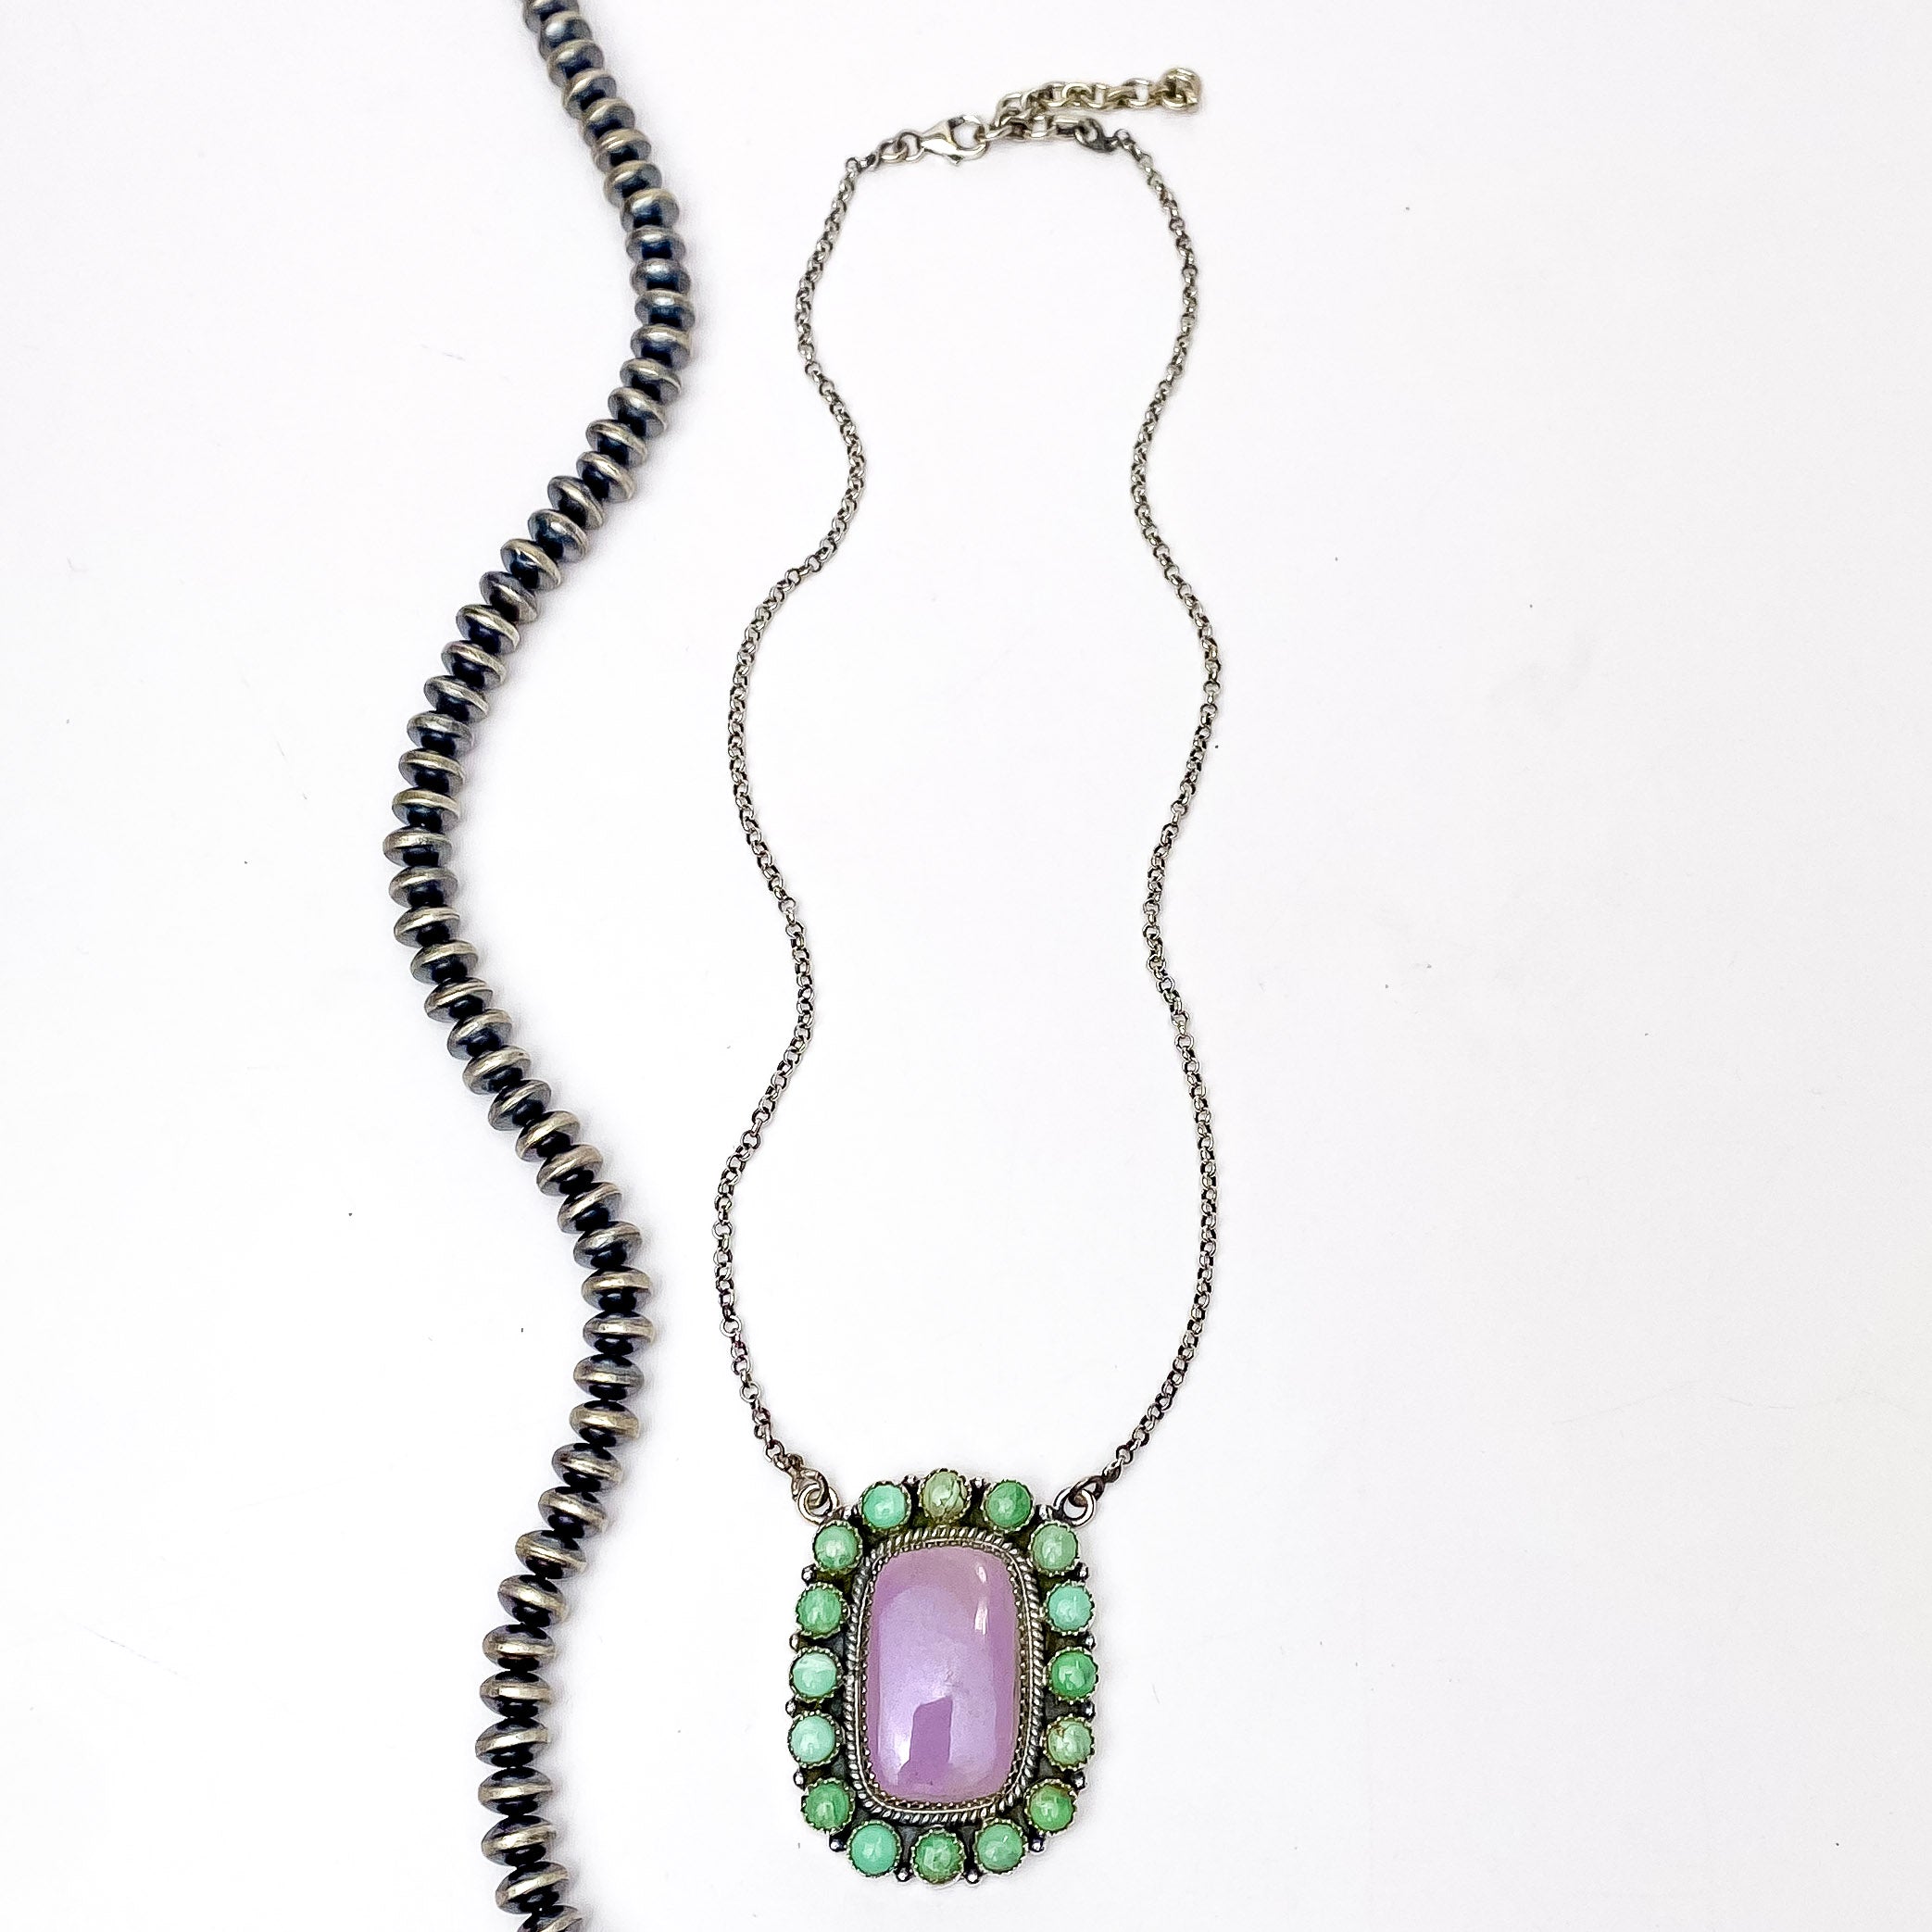 Hada Collection | Handmade Sterling Silver Necklace with Multi Stone Cluster Pendant - Giddy Up Glamour Boutique